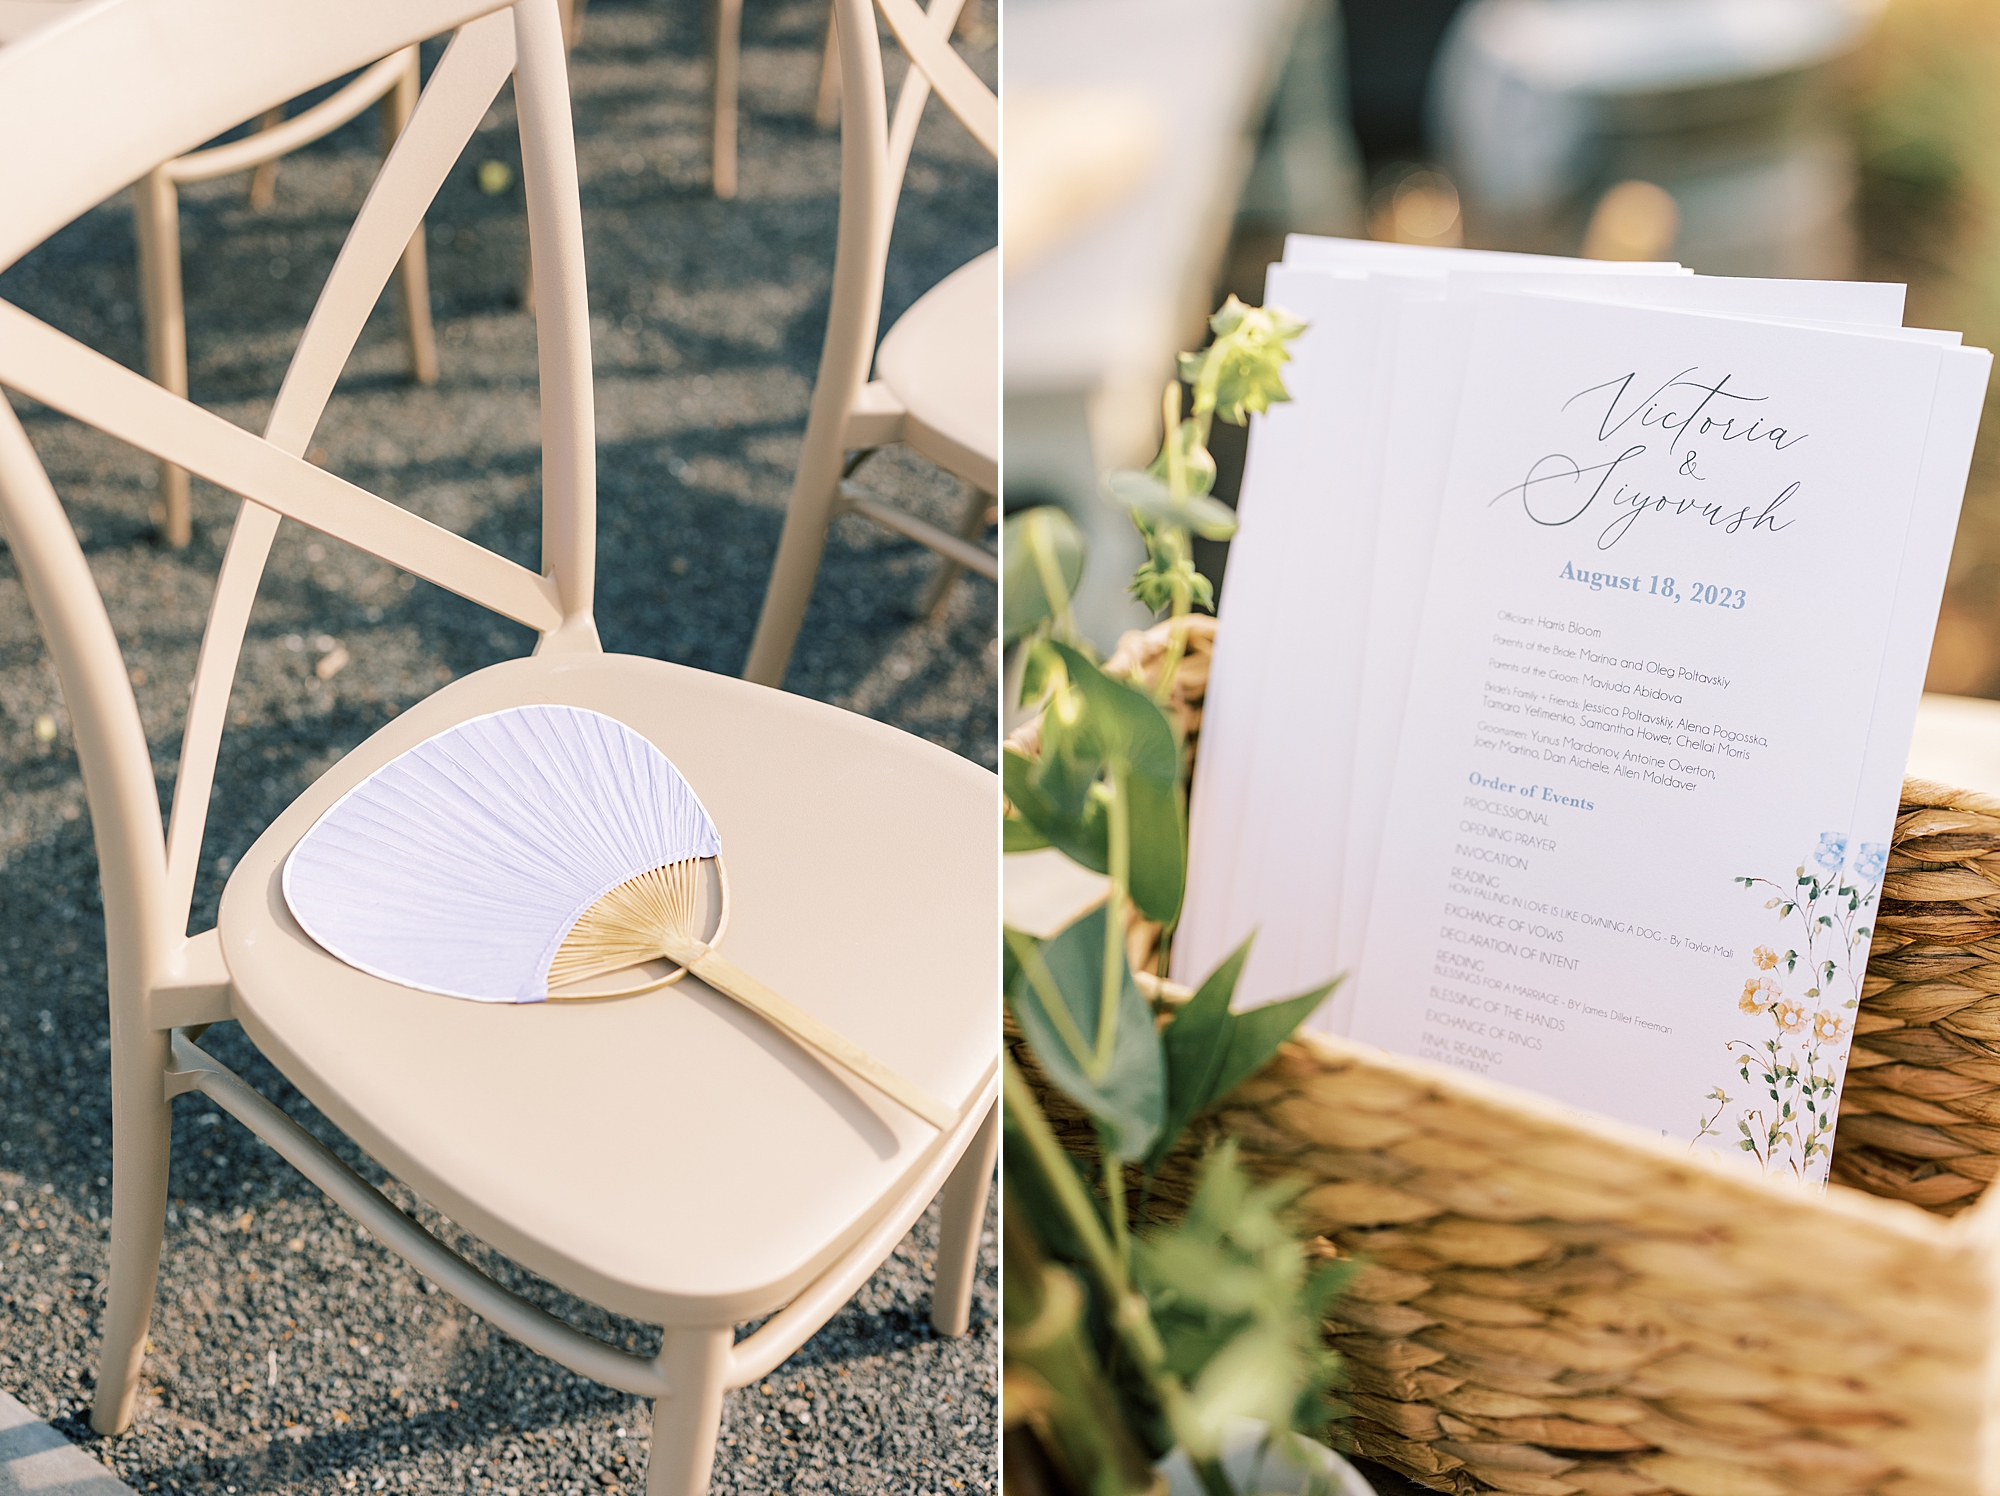 fans and programs for outdoor wedding ceremony at Terrain DelVal